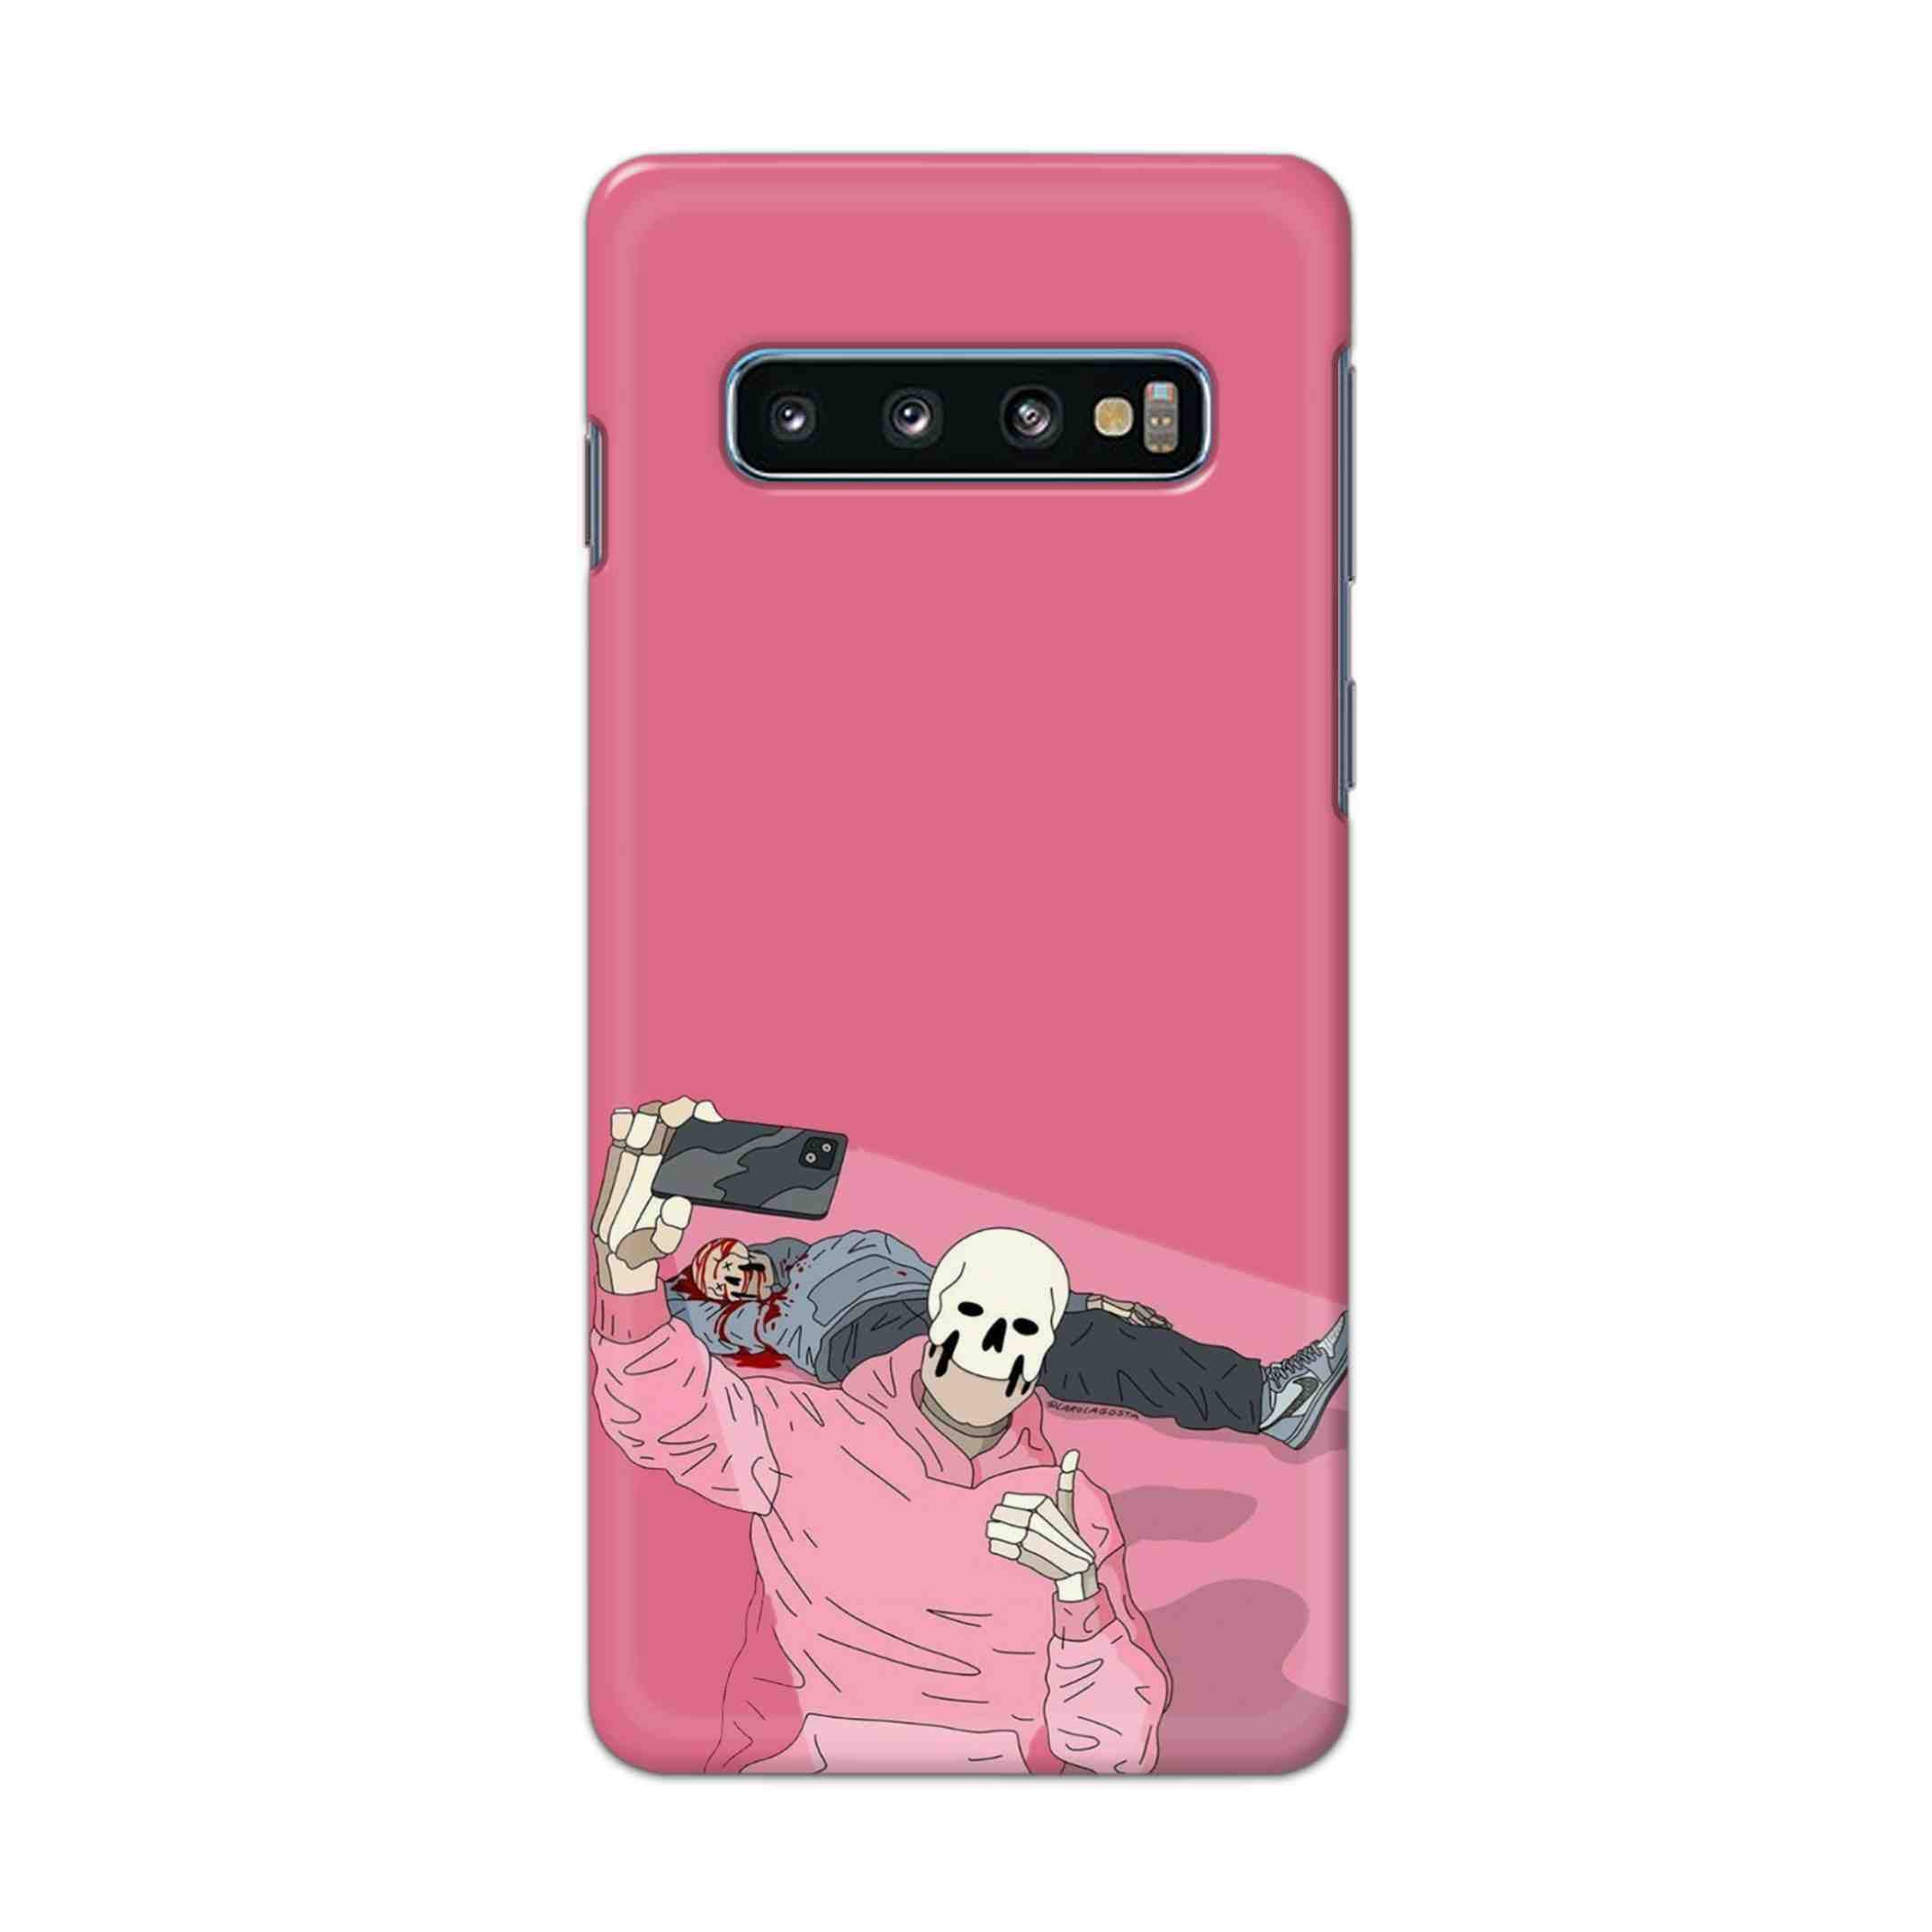 Buy Selfie Hard Back Mobile Phone Case Cover For Samsung Galaxy S10 Online